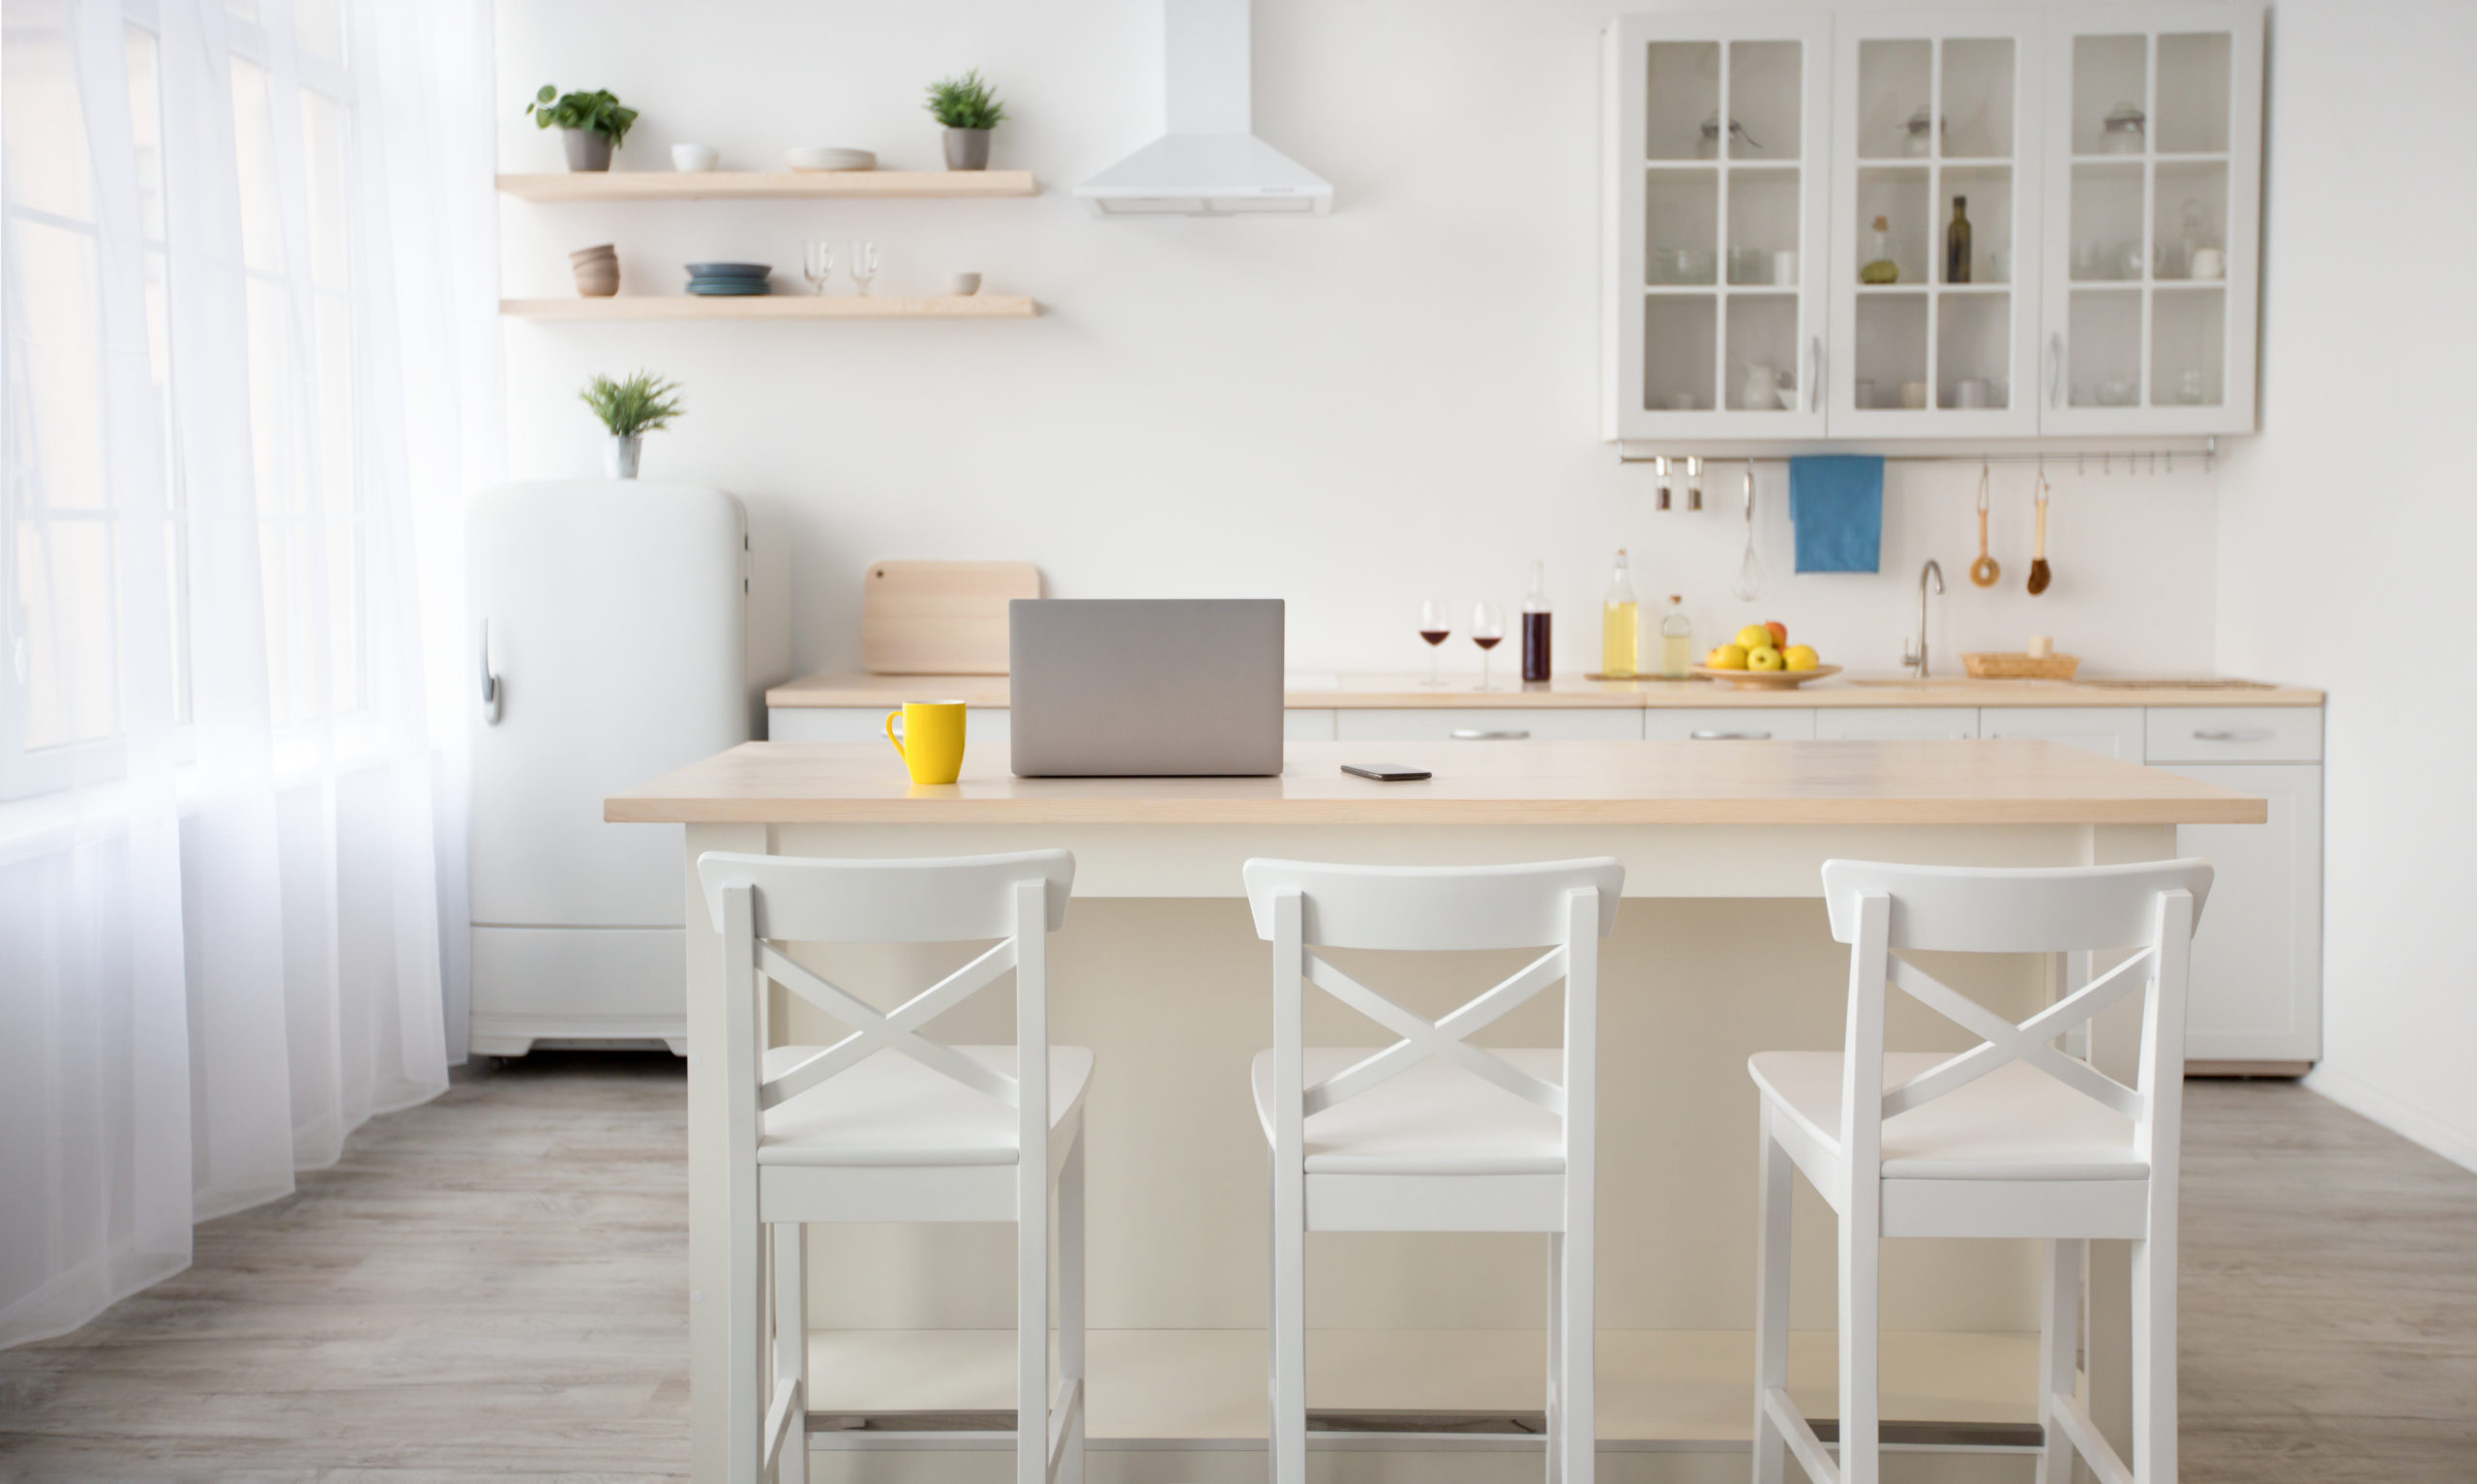 Workspace in kitchen and modern dining room interior. Yellow cup, laptop and smartphone on table, chairs, utensils on furniture, small refrigerator, extractor hood, white walls, curtains in daylight